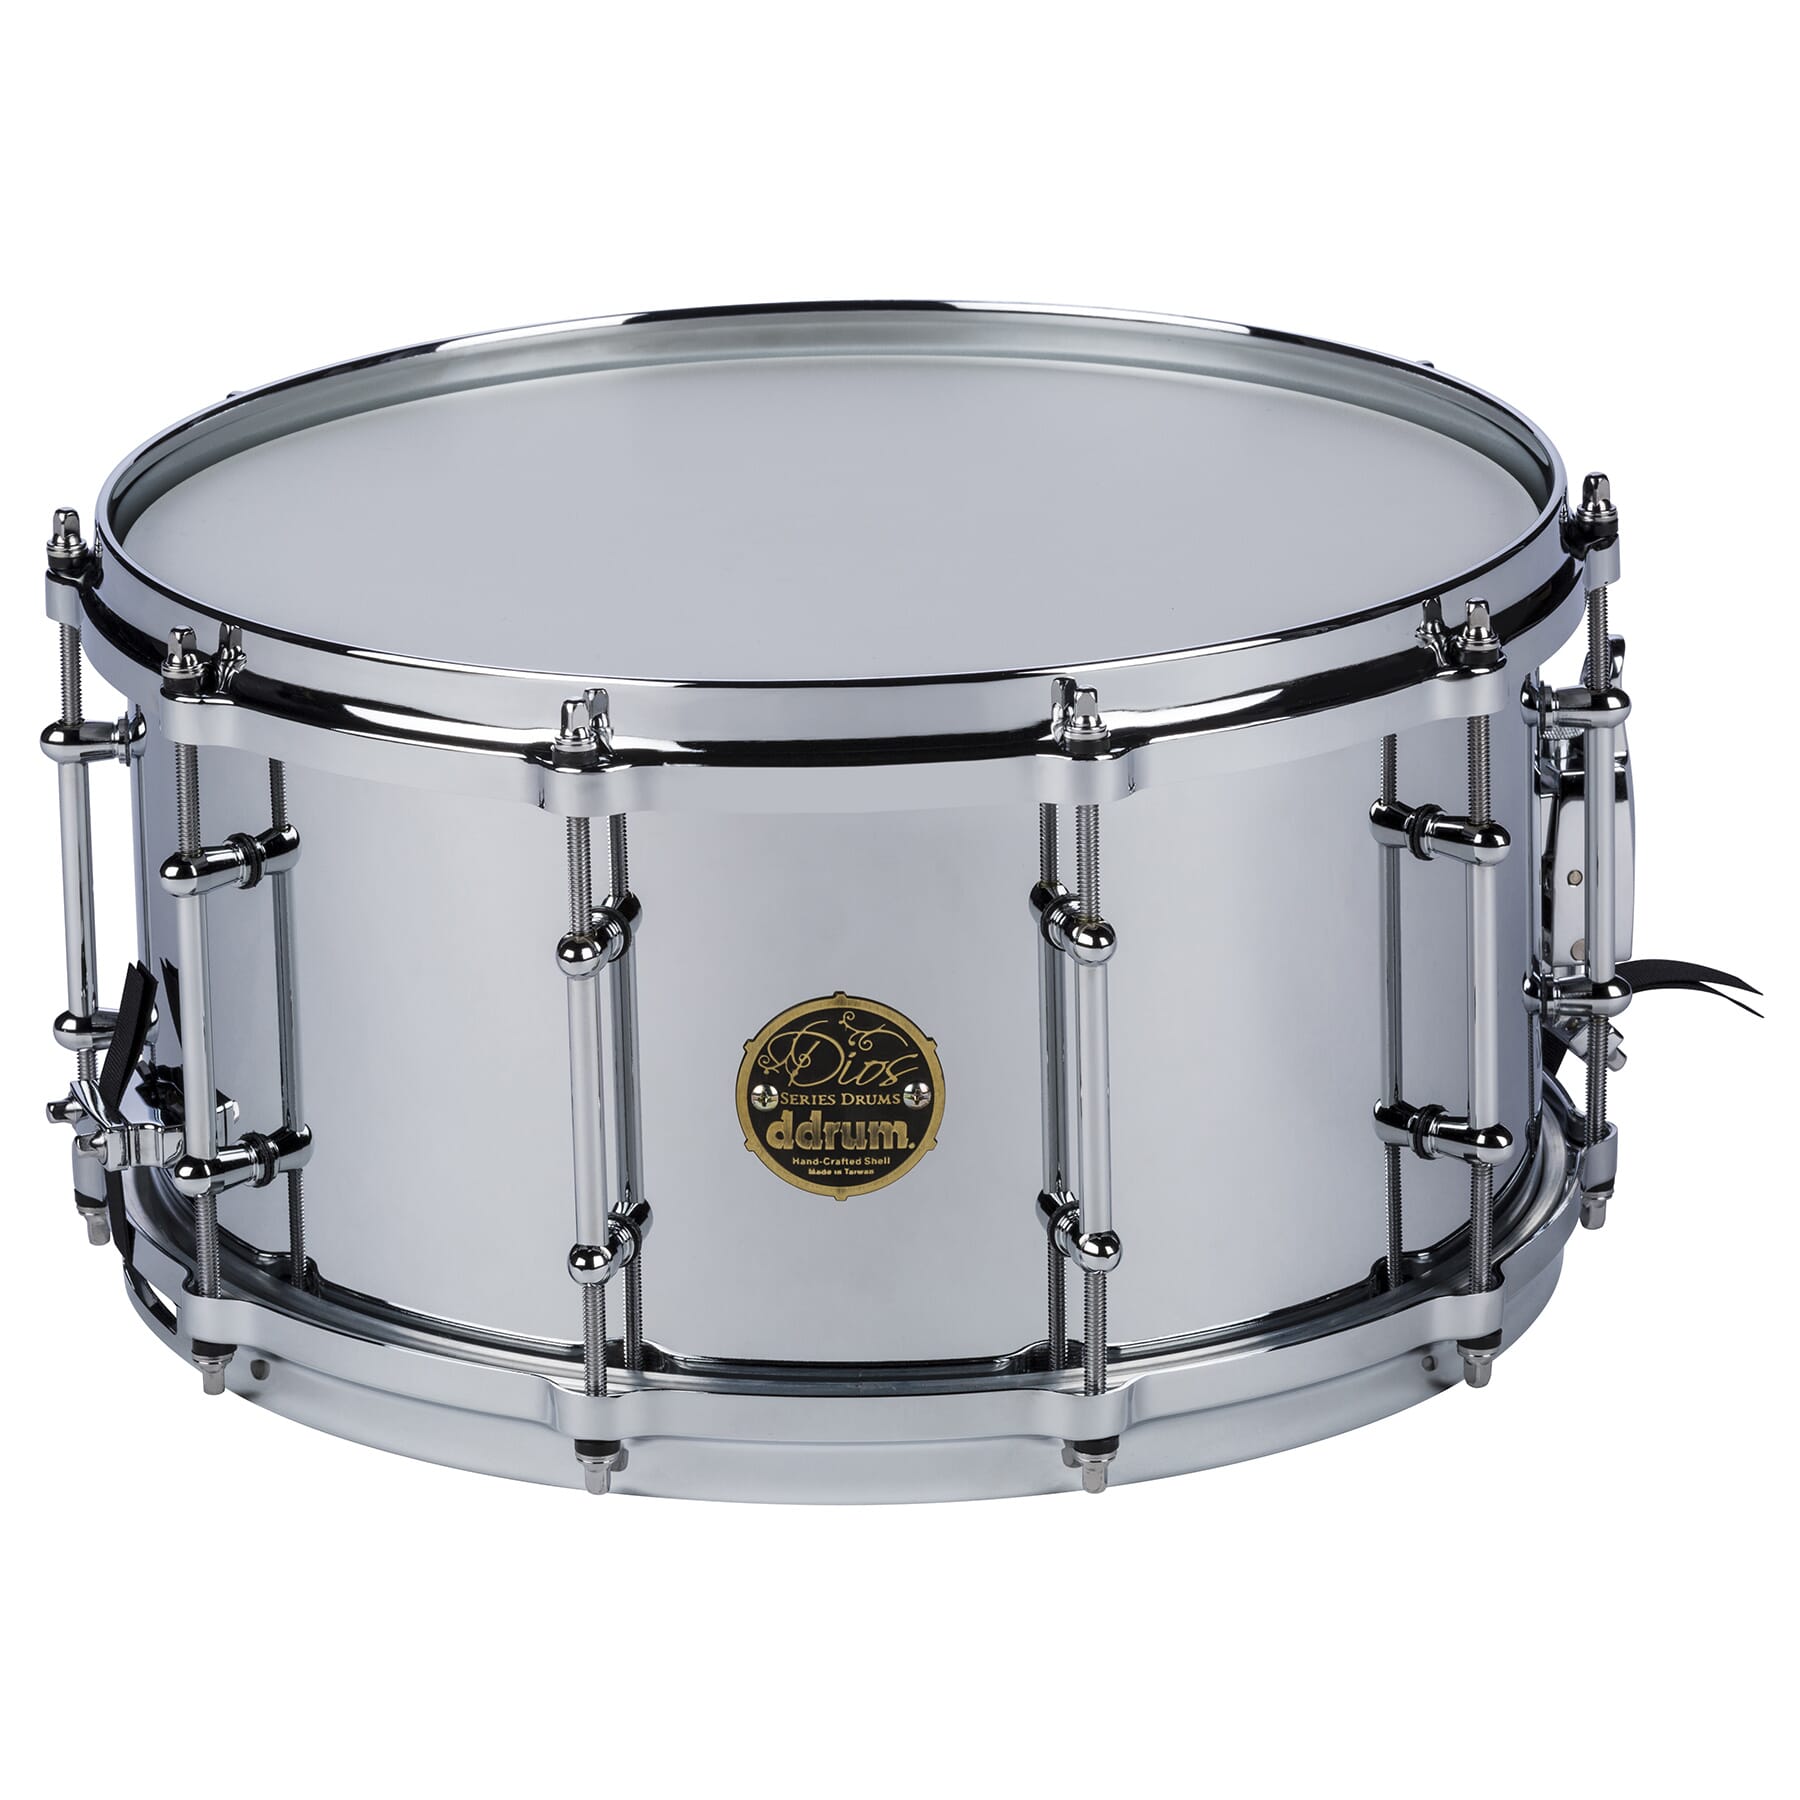 Dios 7x14 Cast Steel Snare